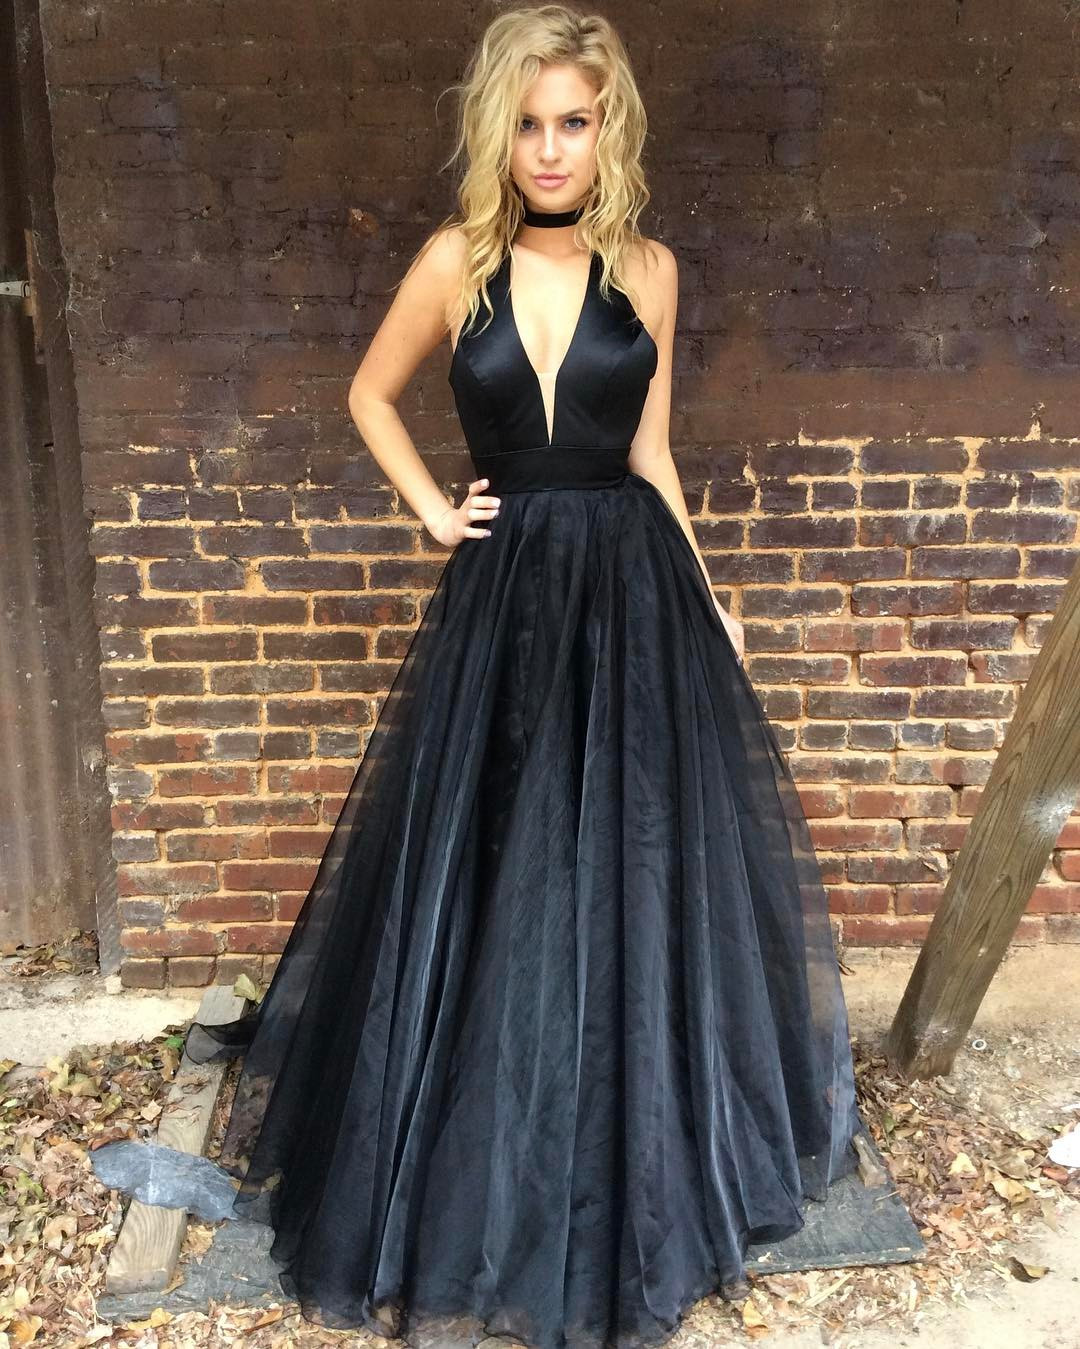 Halter Prom Dress,v Neck Dress,long Prom Dresses,sexy Prom Gowns,long Formal Dress,black Prom Dress ,ball Gowns